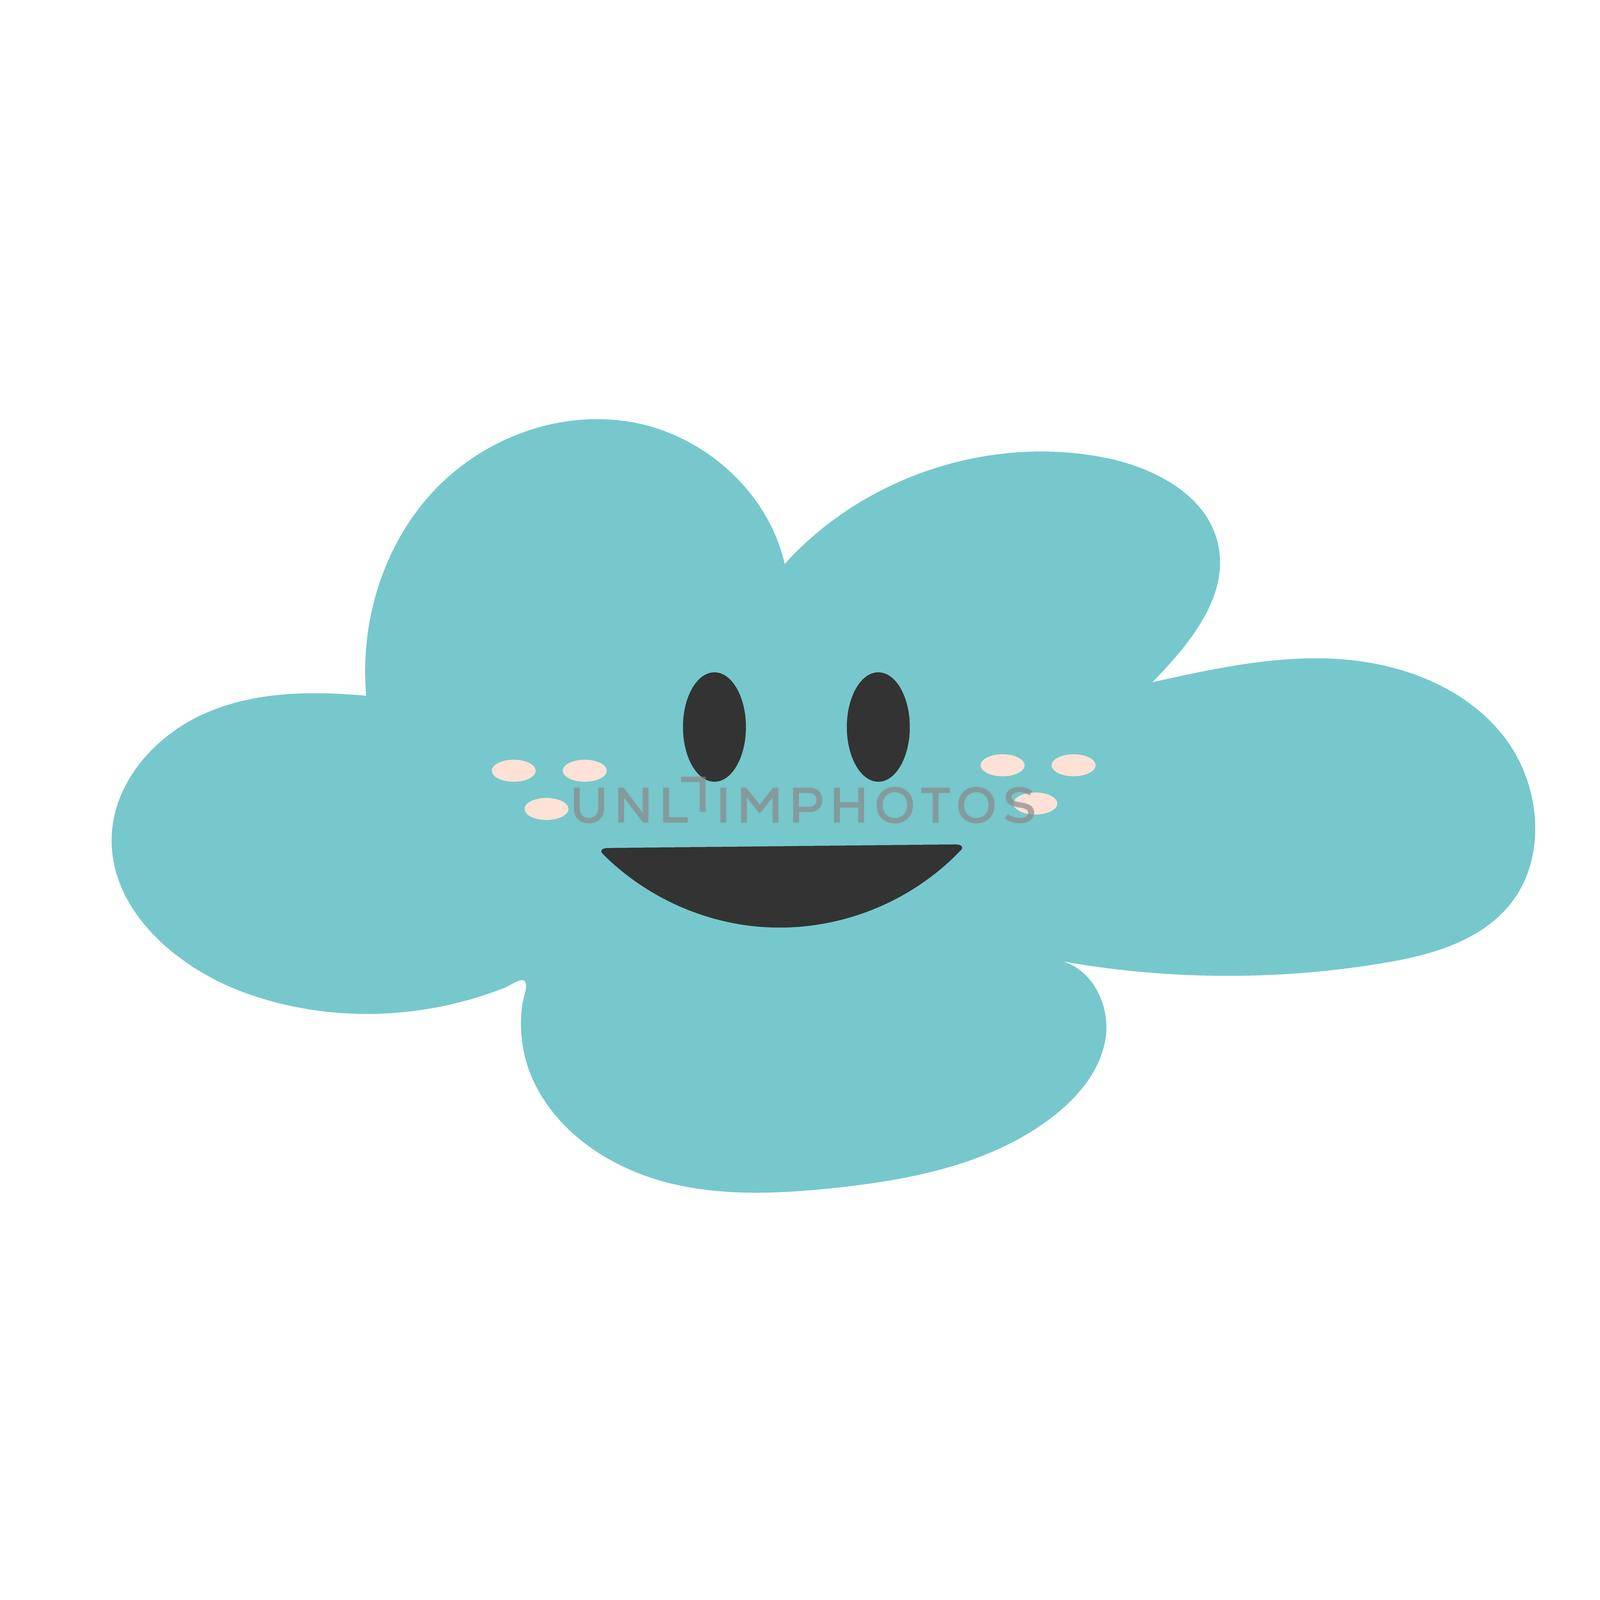 Cute hand drawn print with happy blue smiling cloud. Simple vector illustration on white